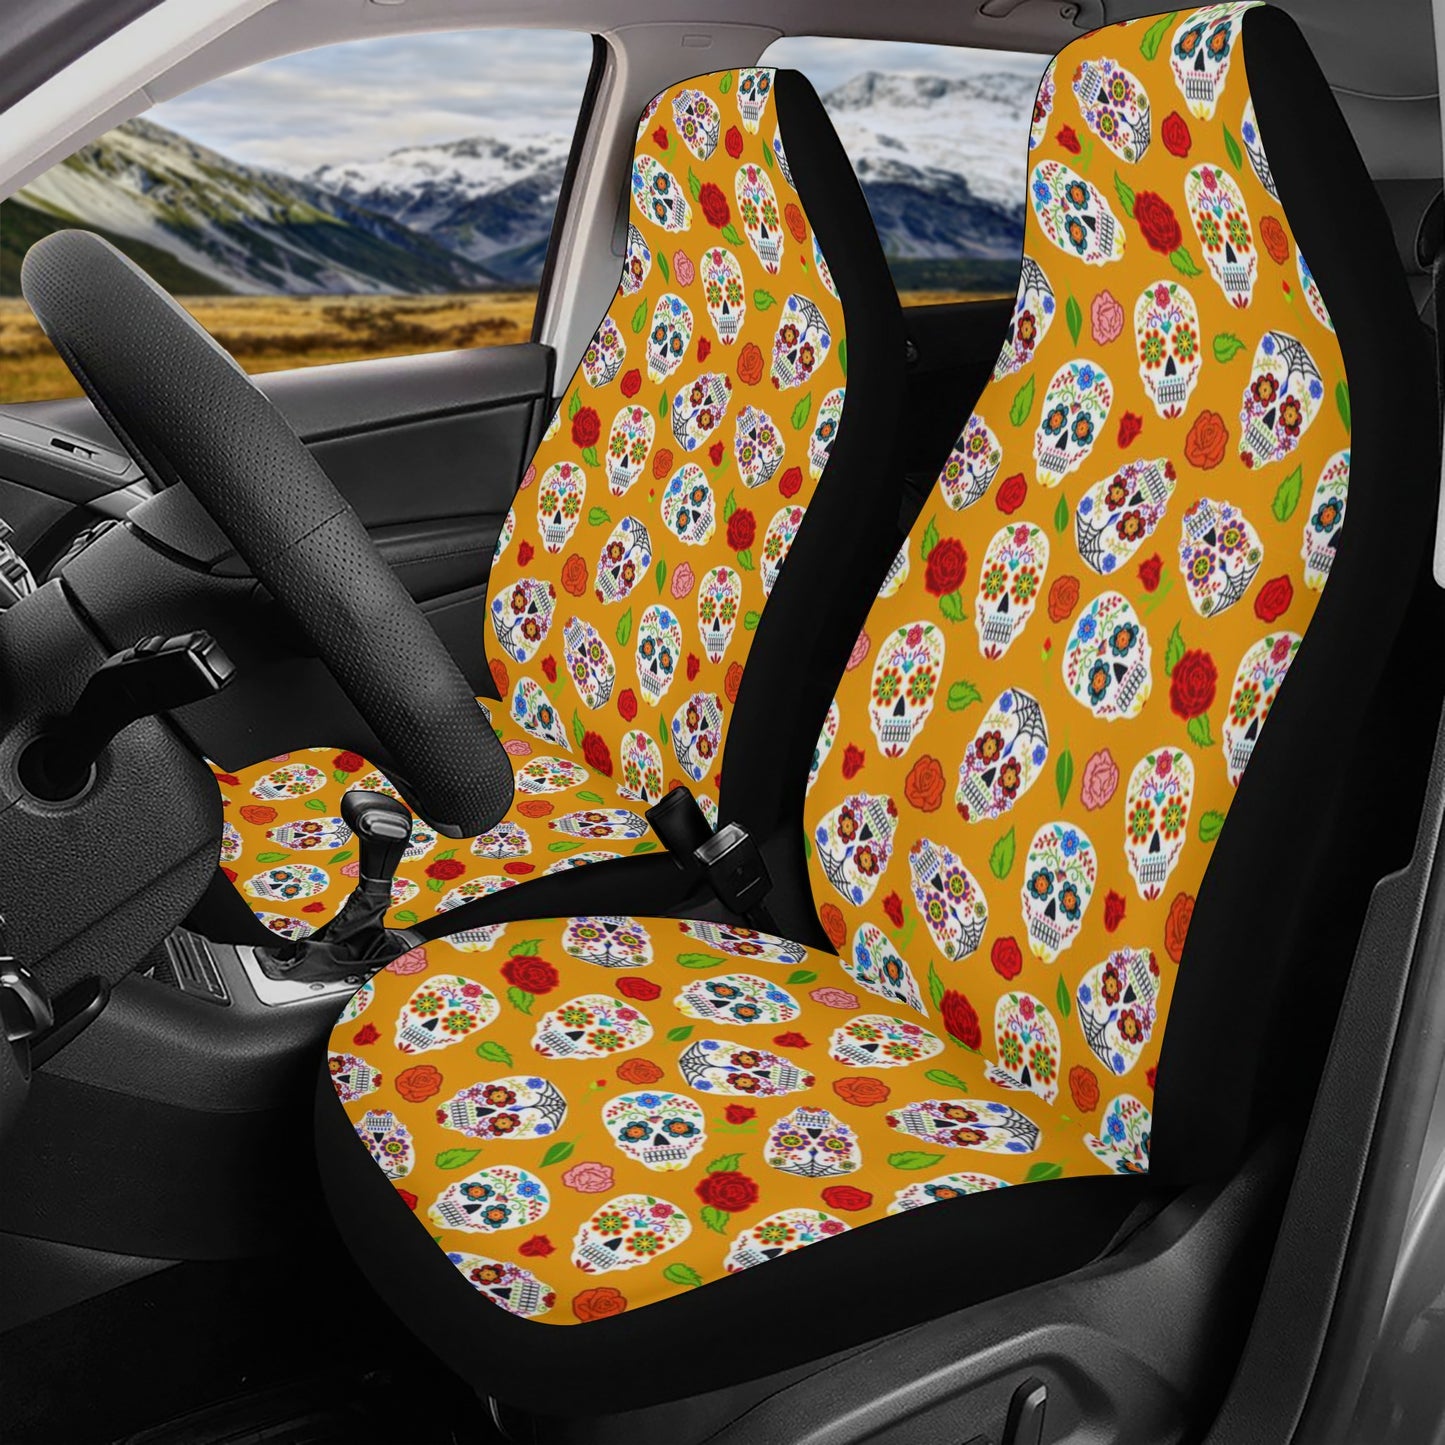 Floral skull slip-on seat covers, day of the dead slip-on seat covers, floral sugar skull car floor mat, sugar skull mat for vehicles, calav